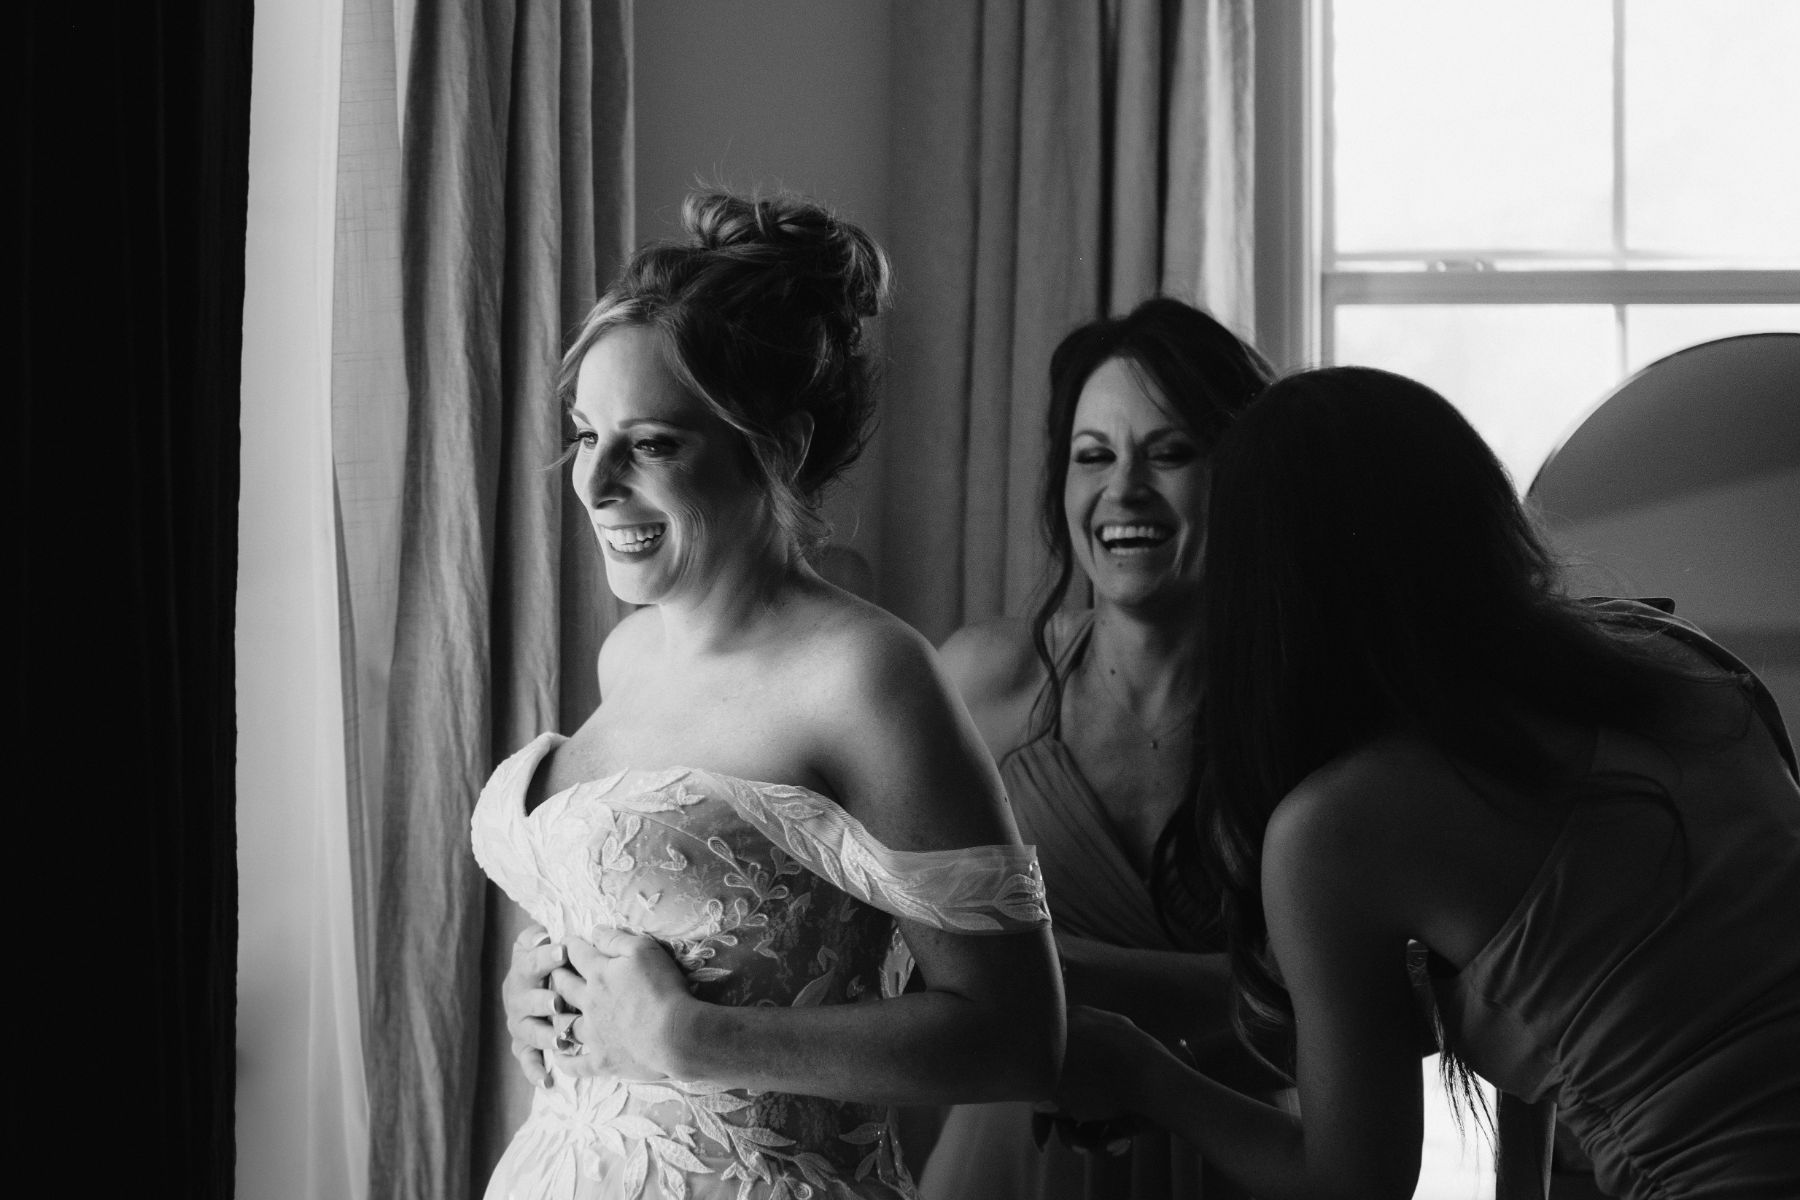 A bride smiles, while to bridesmaids help zip up her dress.